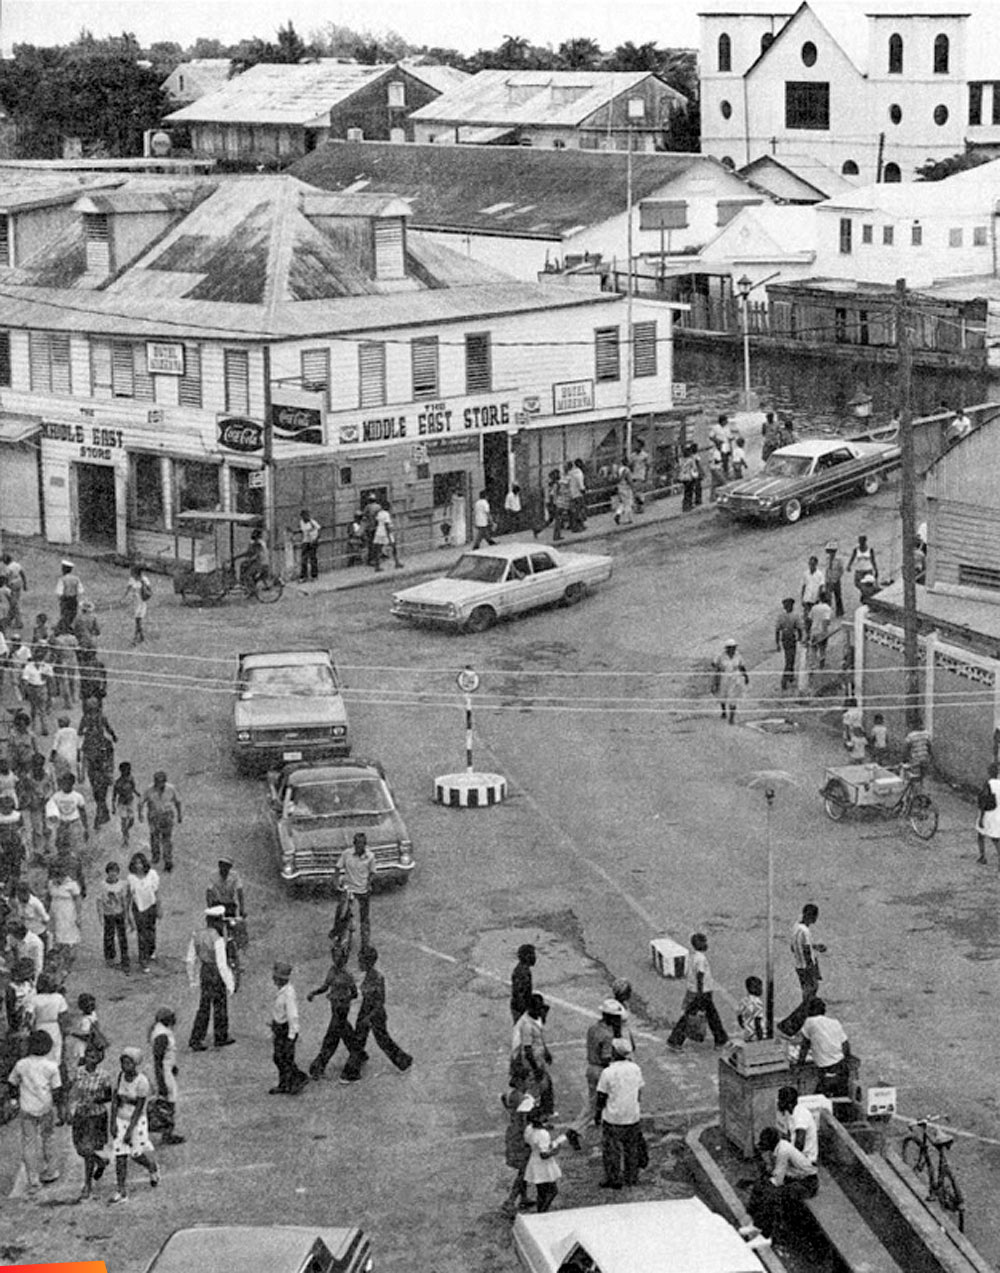 Intersection of Regent and Alberta streets at the south end of the swing bridge which separates the two major sections of Belize City, 1970's